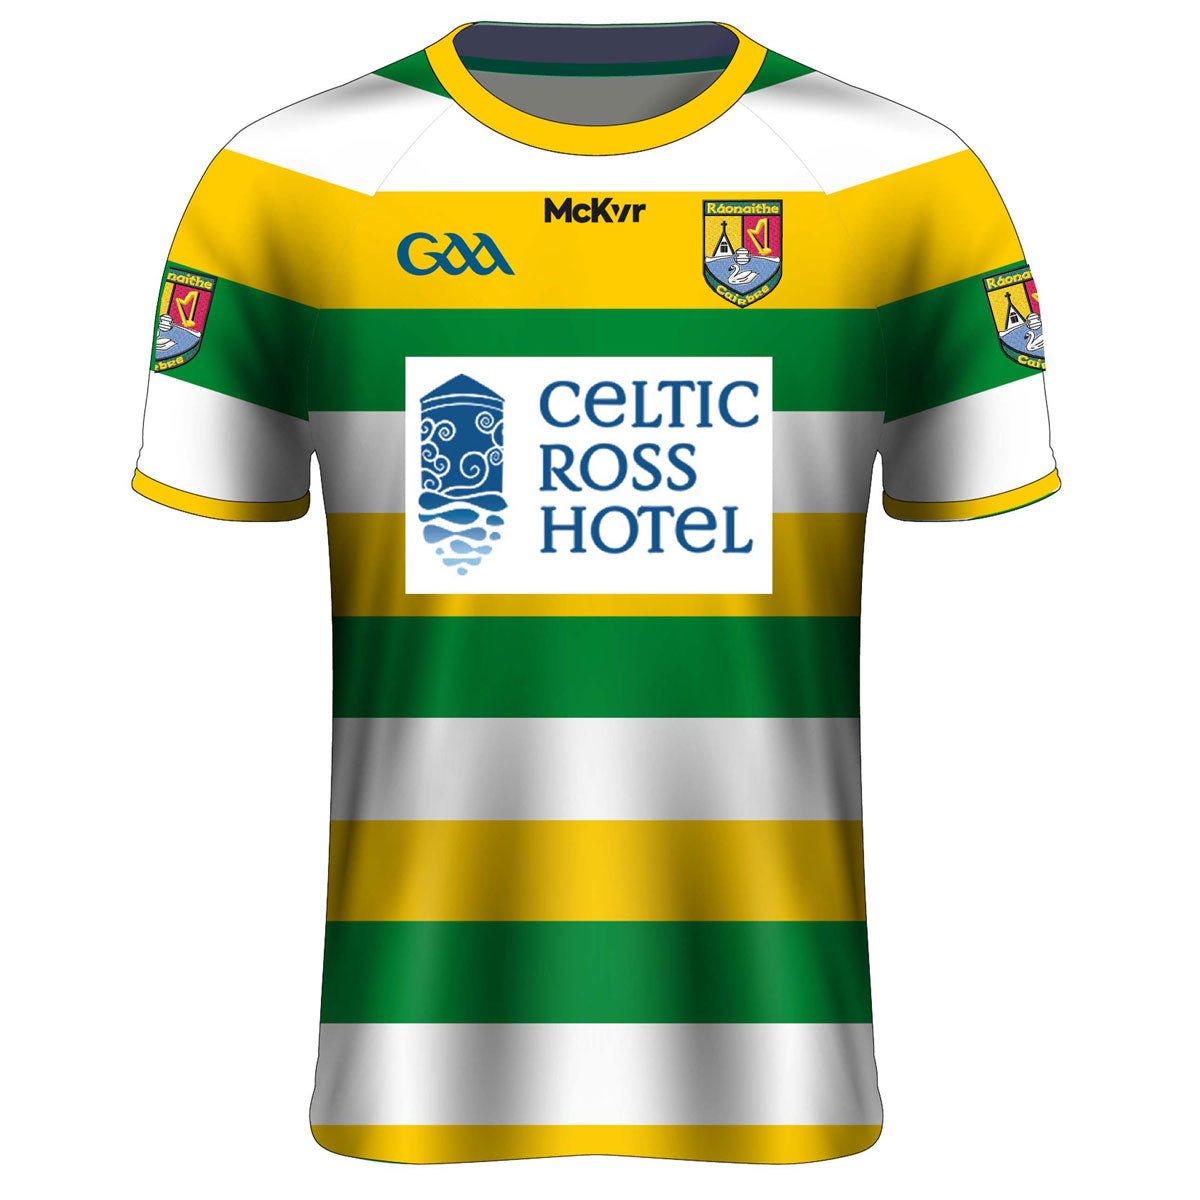 Mc Keever Carbery Rangers Playing Jersey - Womens - Green/Yellow/White